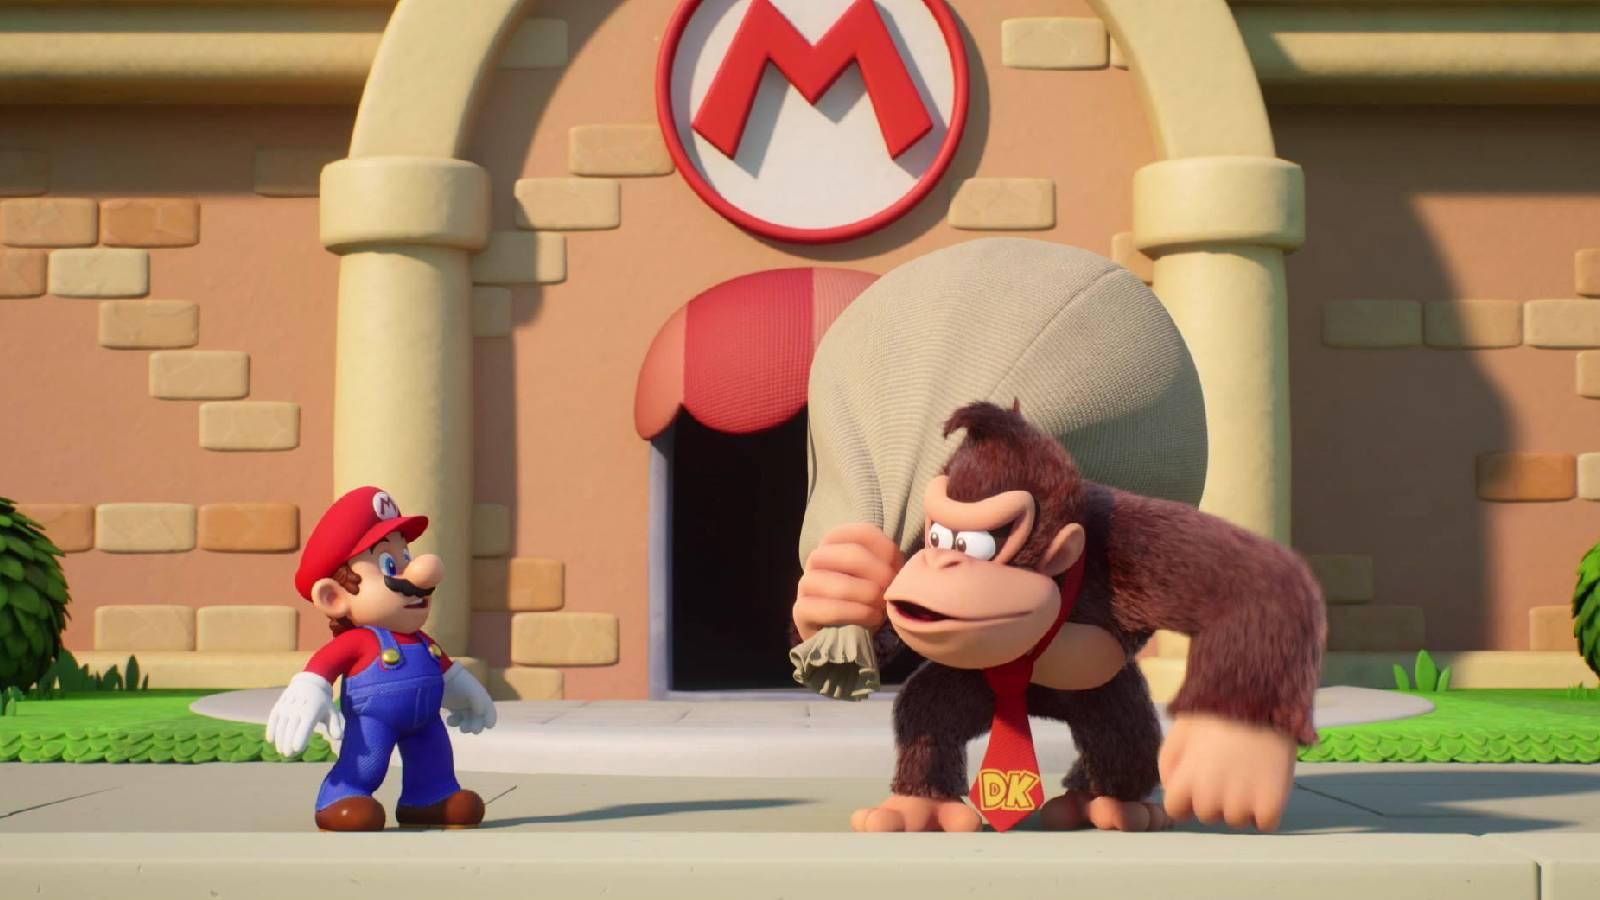 A screenshot from Mario vs. Donkey Kong shows Donkey Kong making an escape with a bag full of Mini-Mario toys